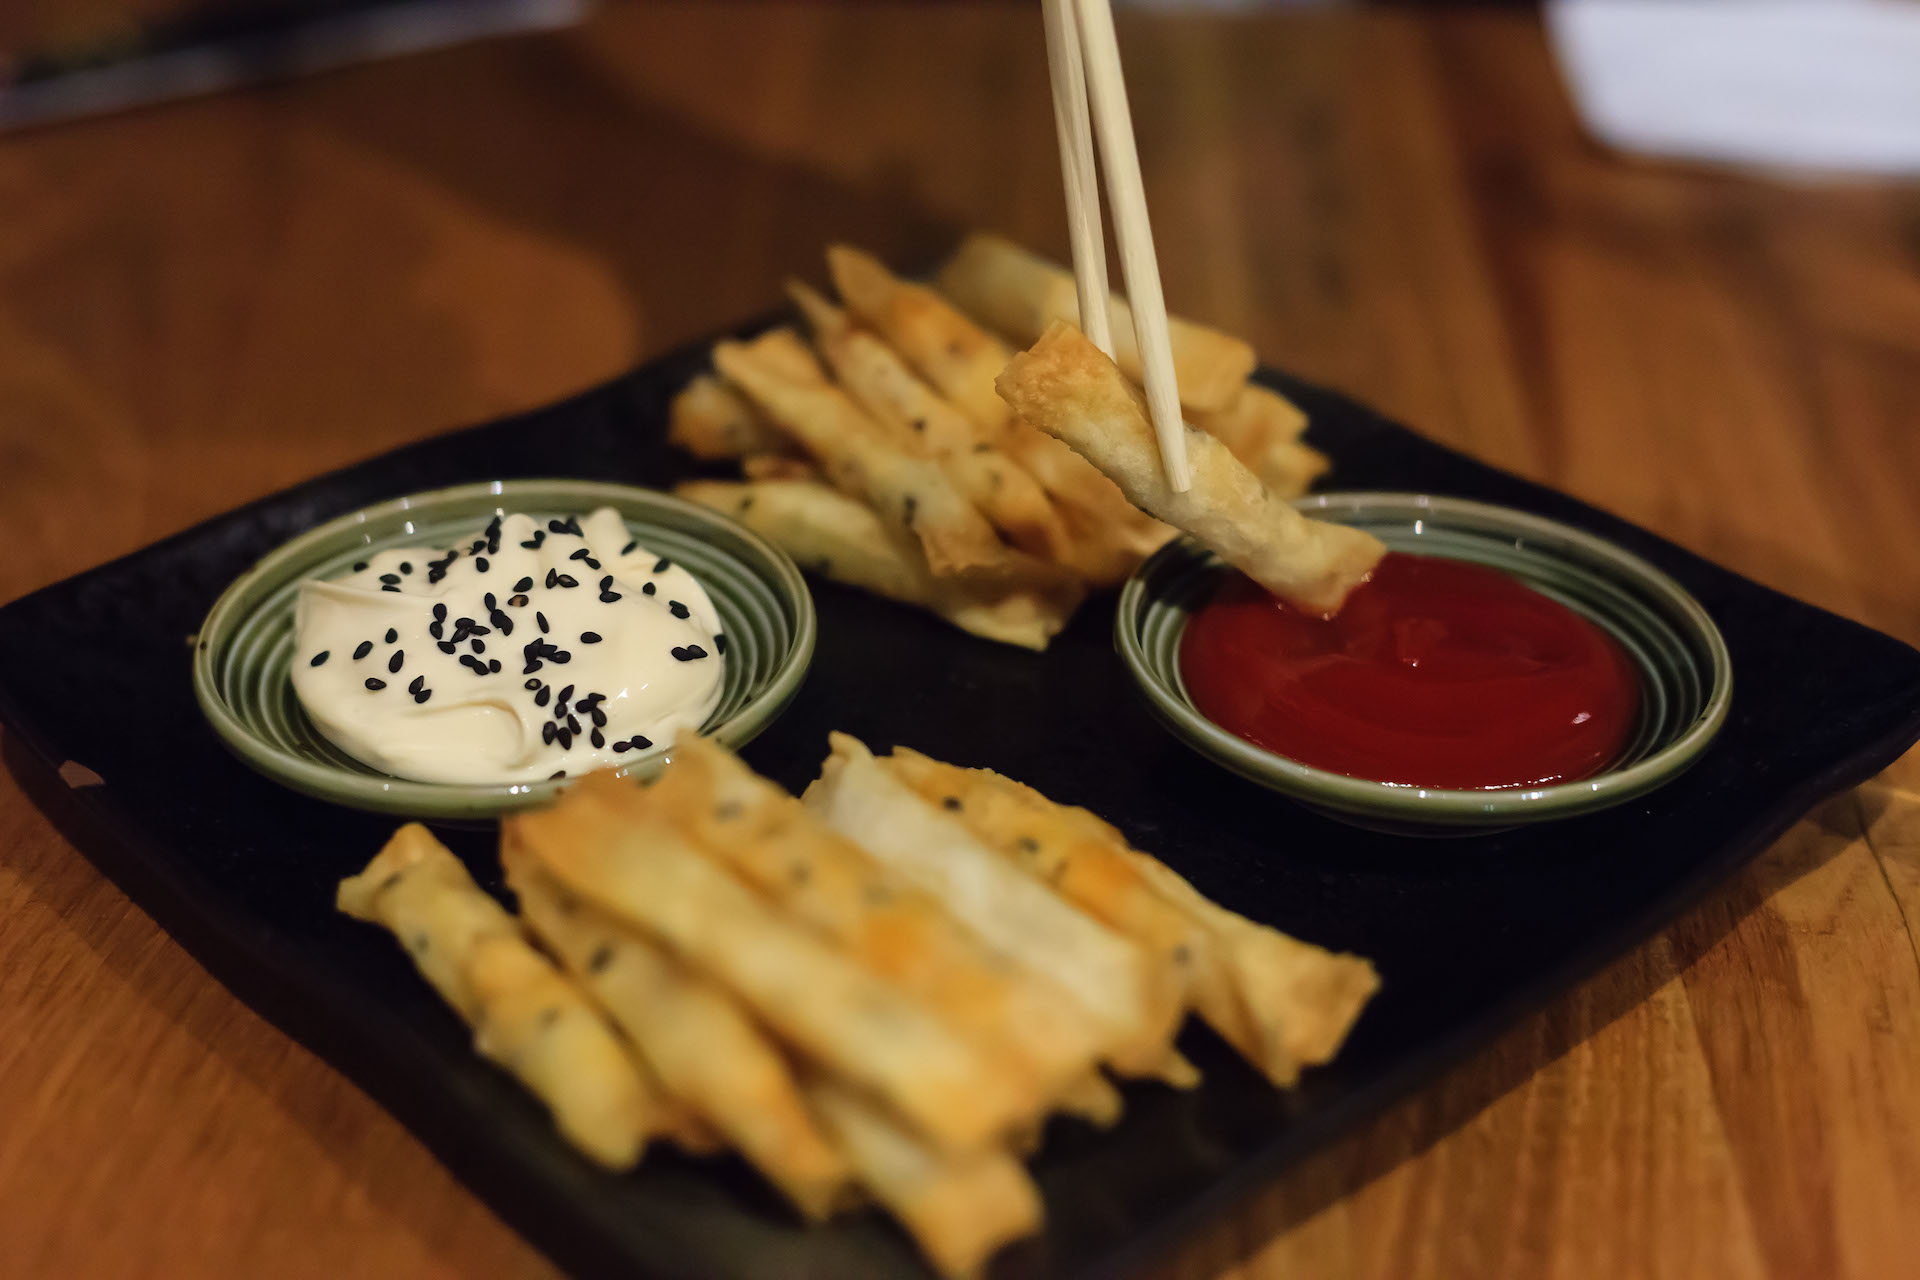 The Uchiwa fries are a popular appetizer.